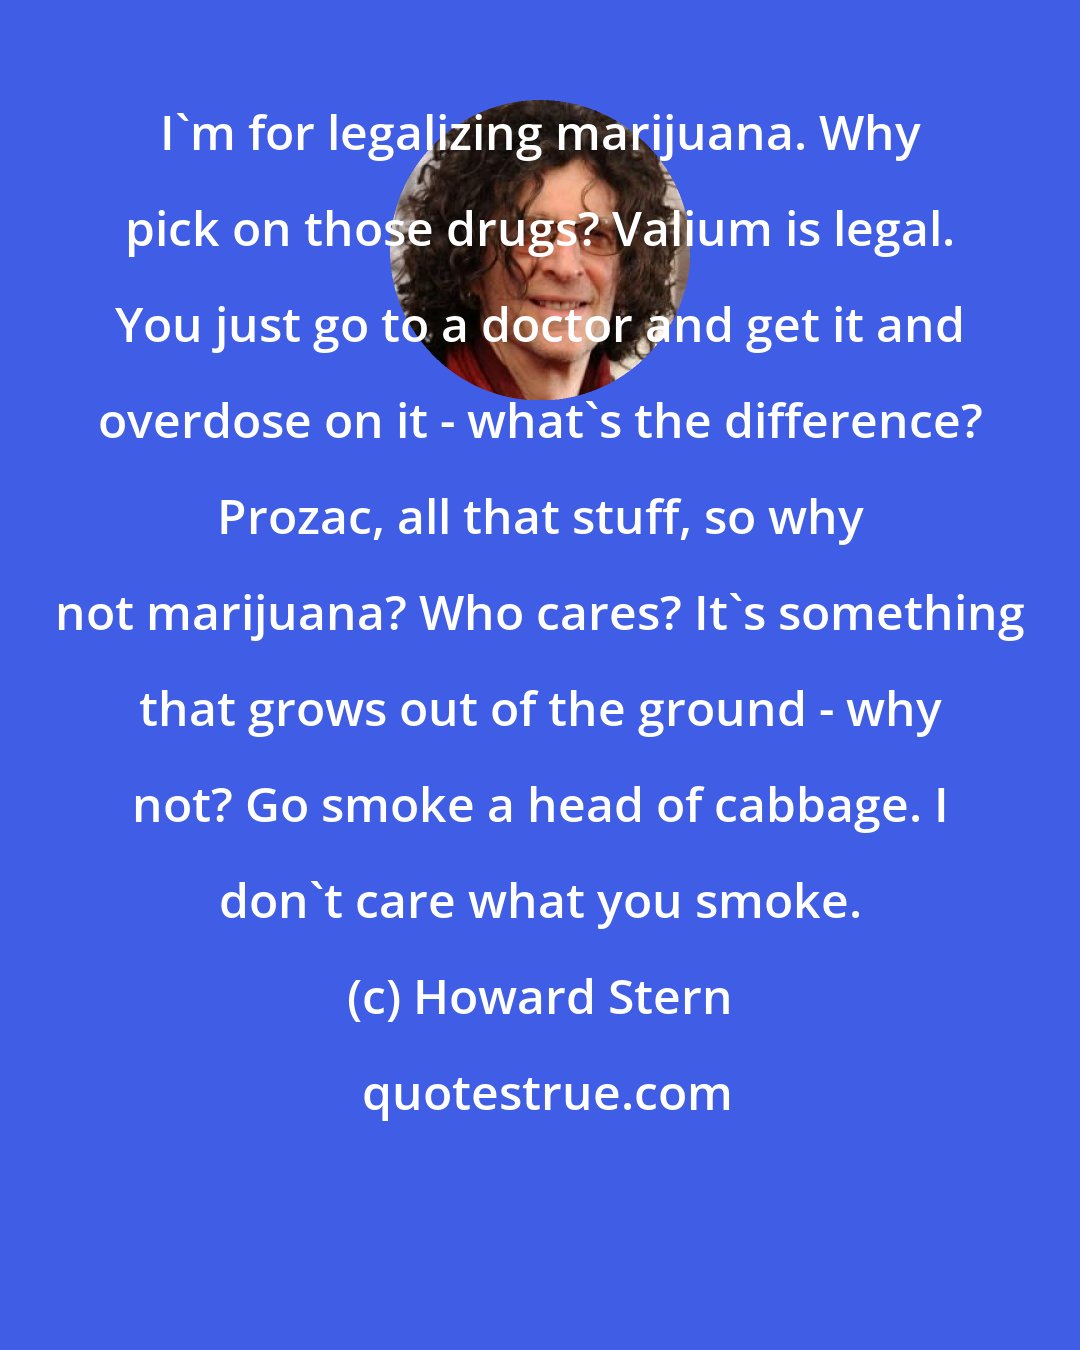 Howard Stern: I'm for legalizing marijuana. Why pick on those drugs? Valium is legal. You just go to a doctor and get it and overdose on it - what's the difference? Prozac, all that stuff, so why not marijuana? Who cares? It's something that grows out of the ground - why not? Go smoke a head of cabbage. I don't care what you smoke.